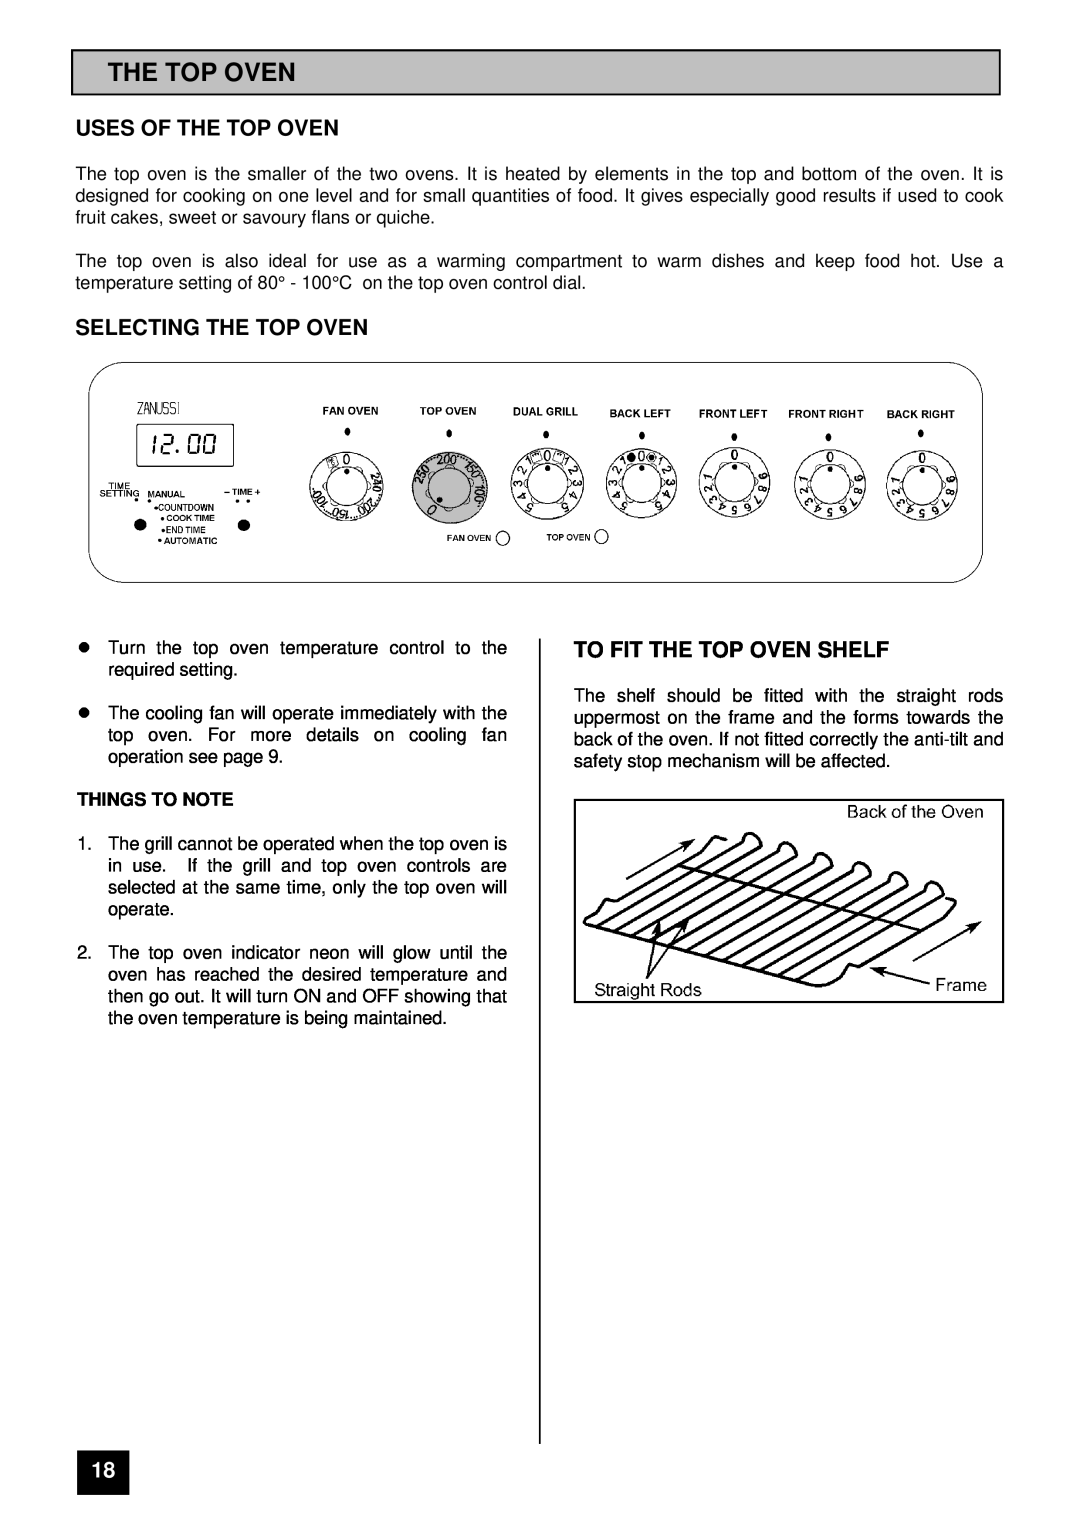 Zanussi ZCE ID manual Uses Of The Top Oven, Selecting The Top Oven, To Fit The Top Oven Shelf, Things To Note 